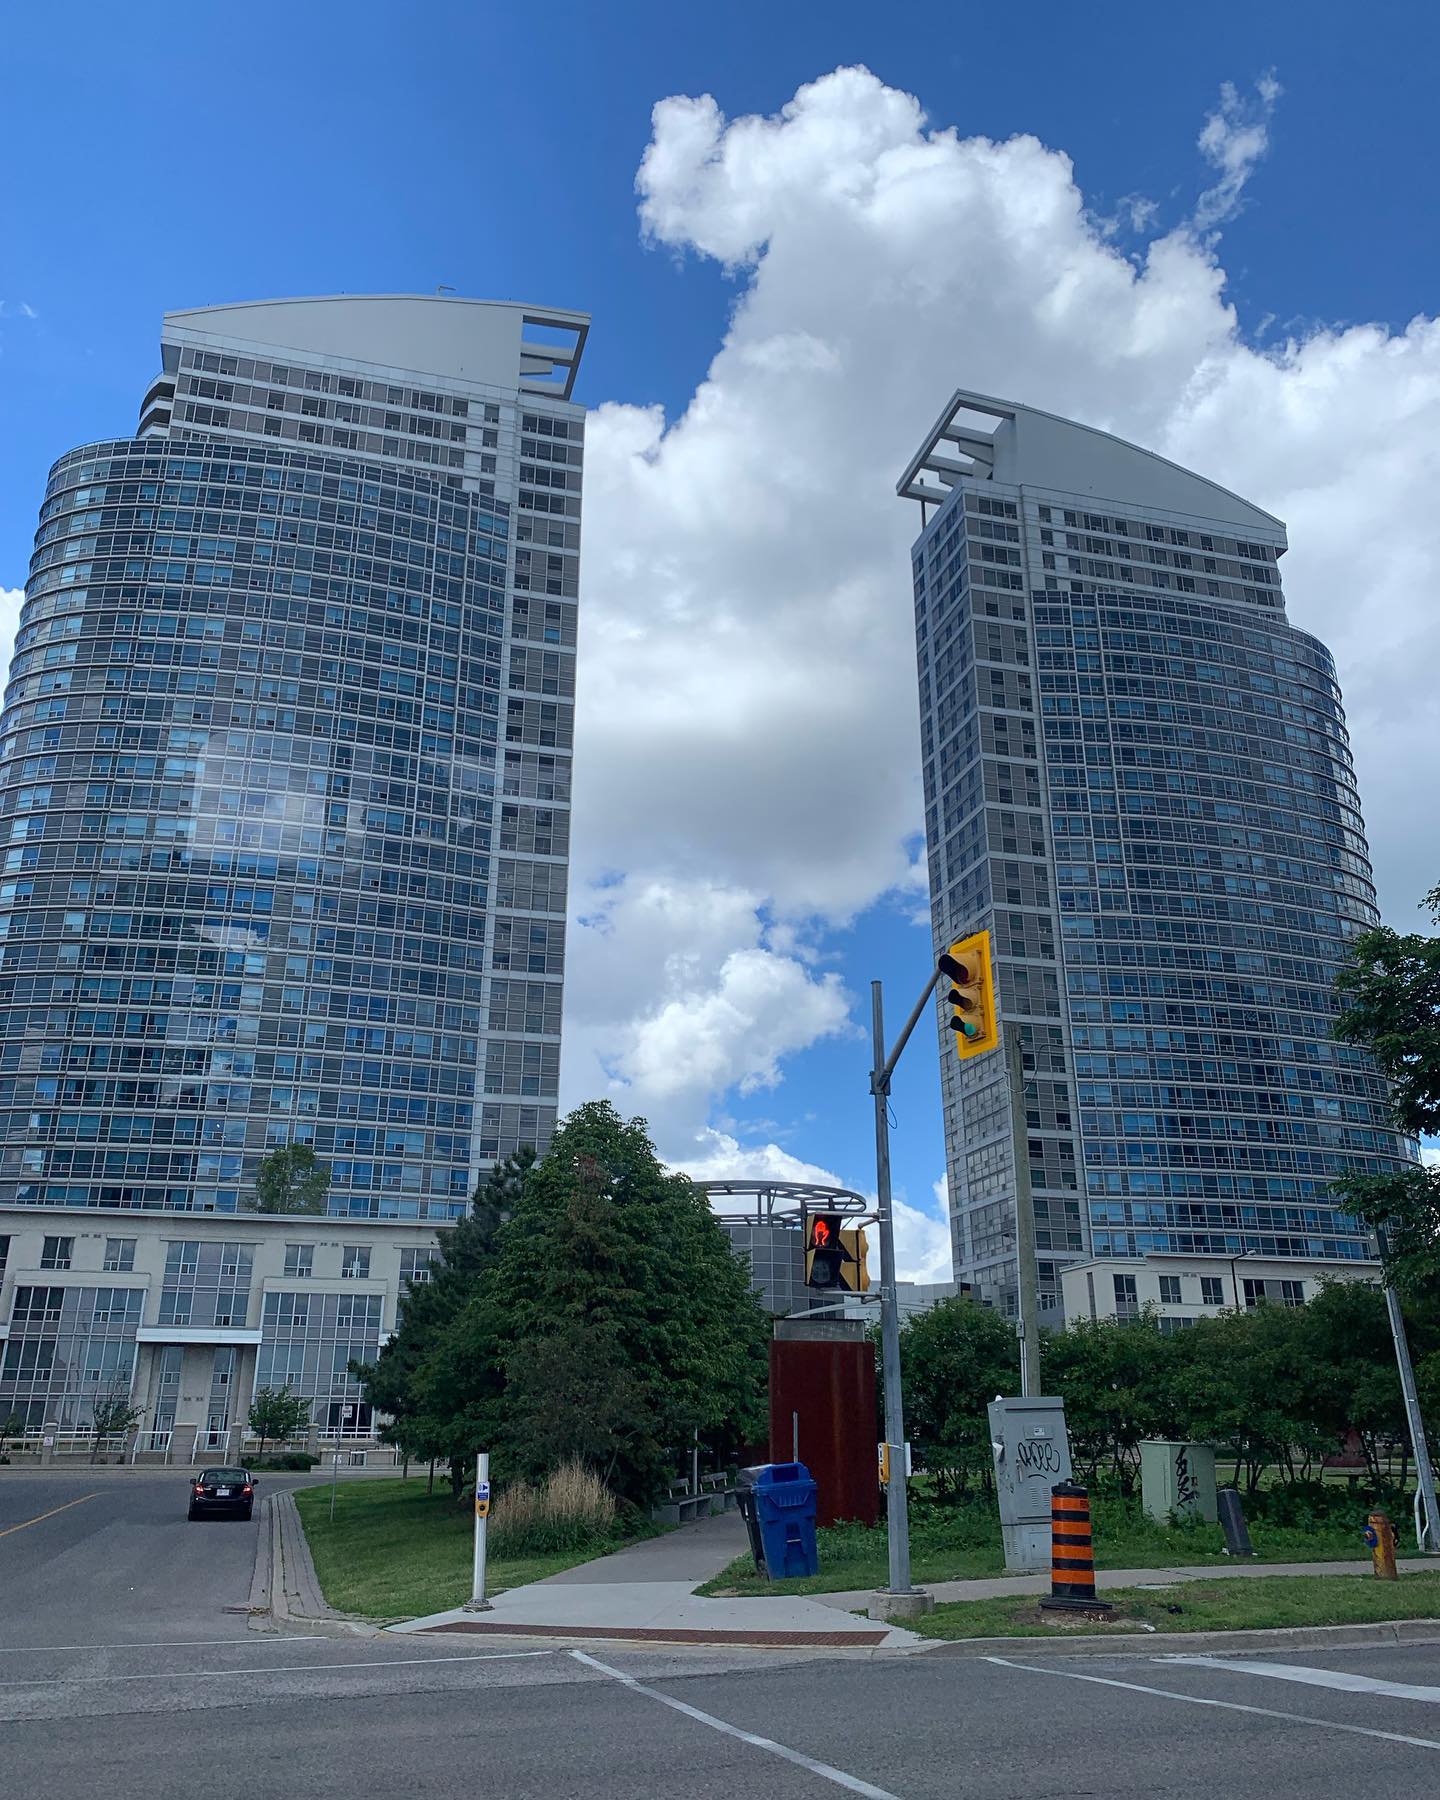 Did you know that @thehidigroup provided mechanical and electrical design for the twin condo buildings, Ellipse I & II in Scarborough. #thg #residentialdesign #condos #engineeringtomorrow #scarborough